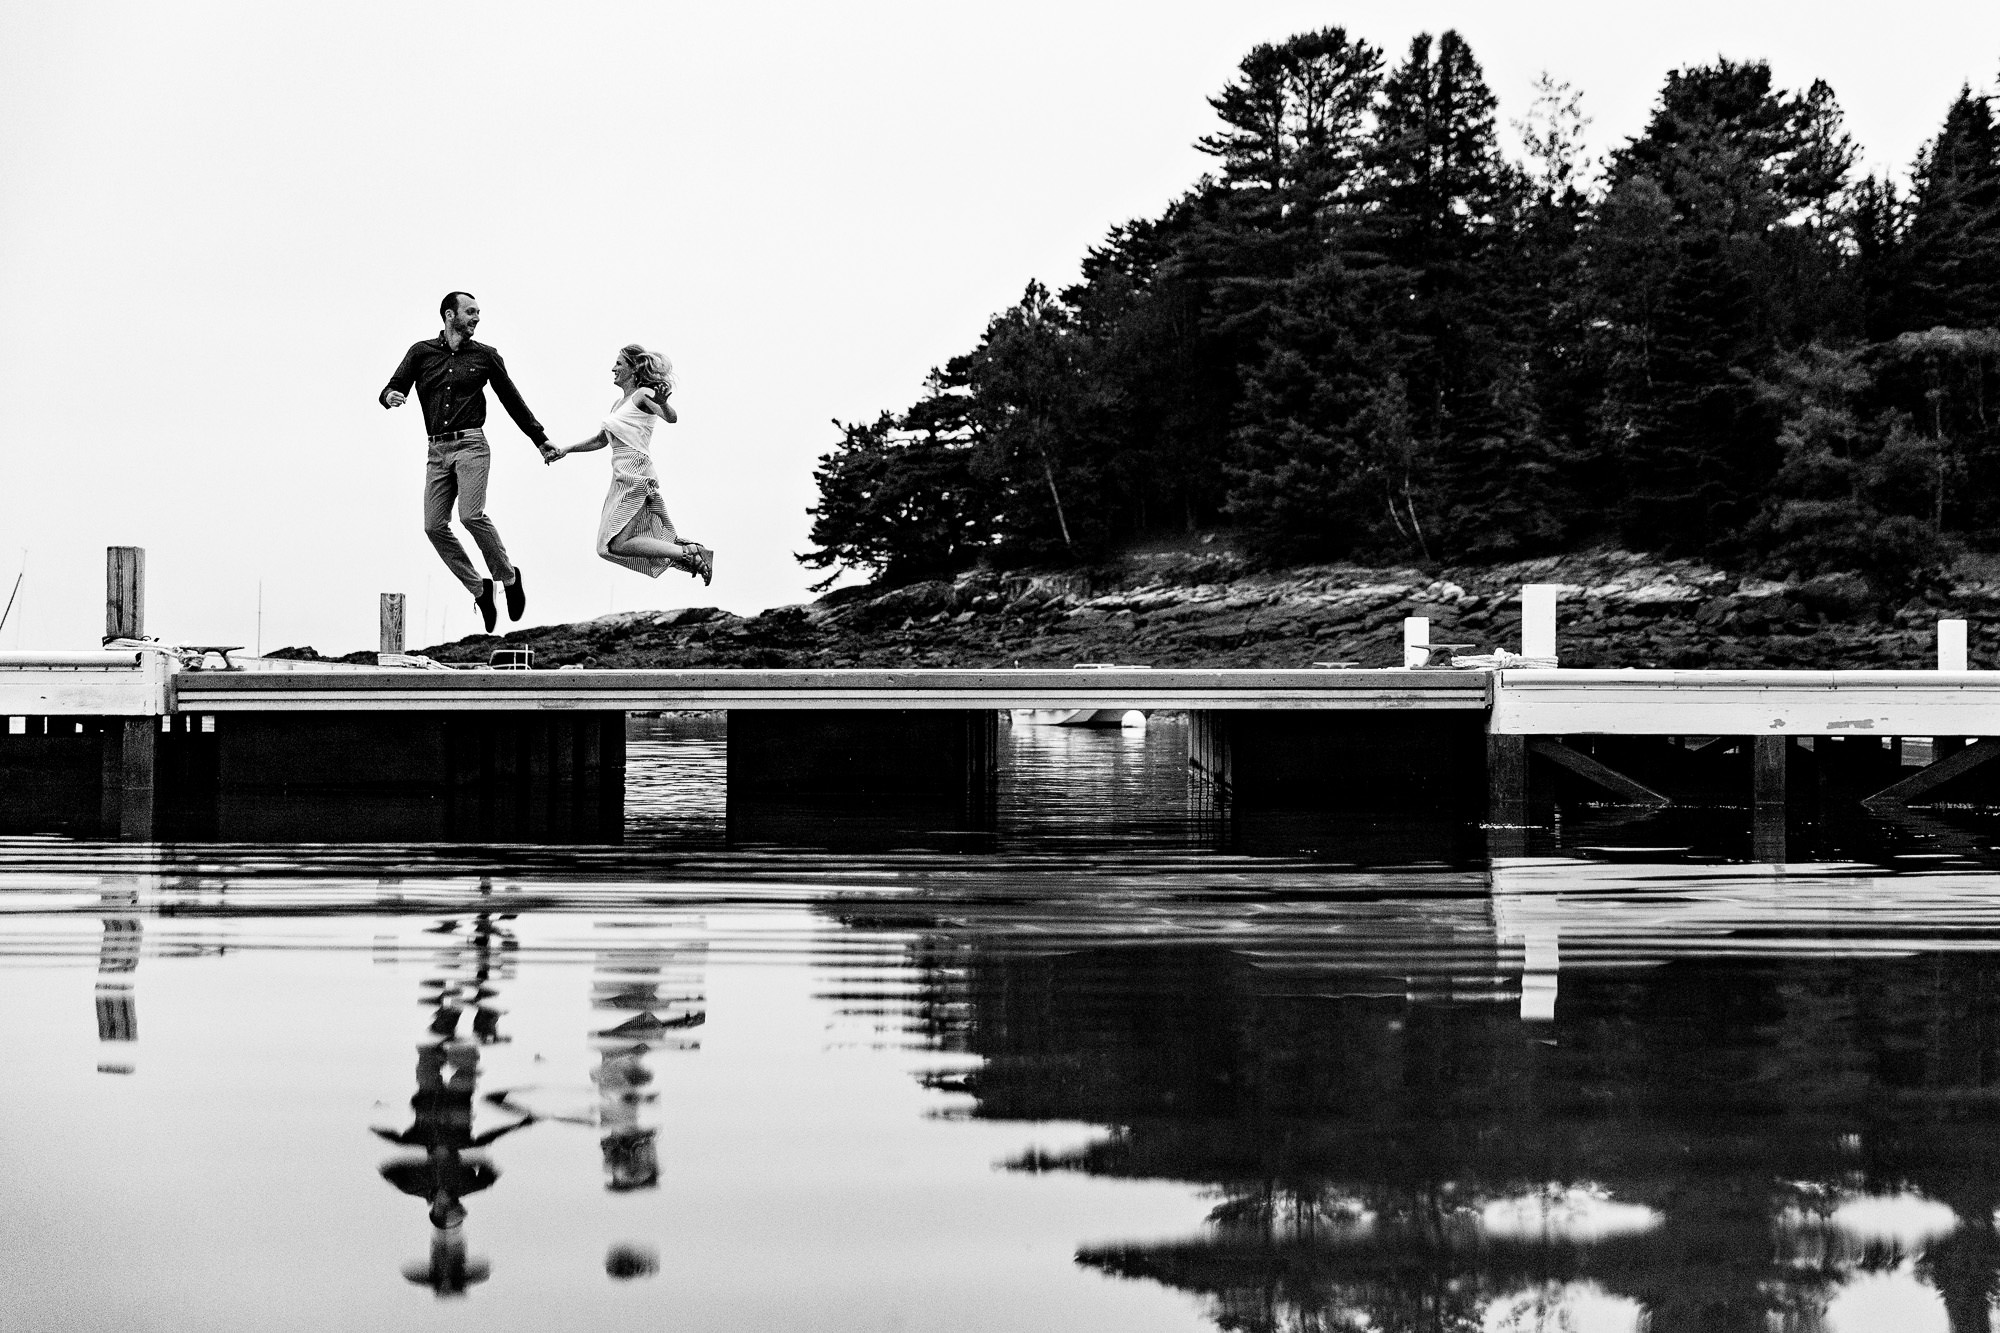 Engagement Portraits taken at a marina in Northeast Harbor, Maine